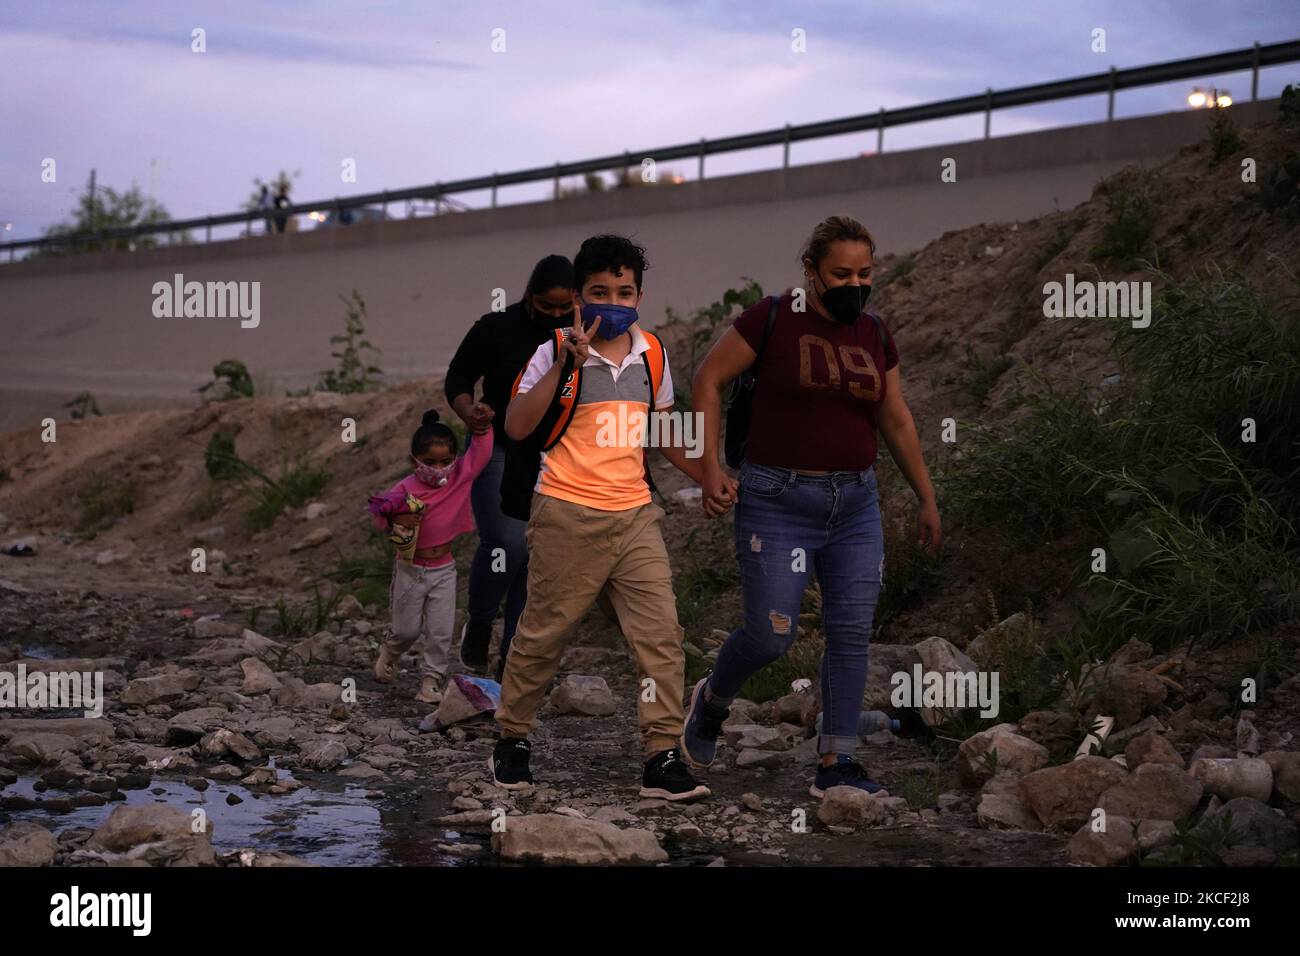 Migrants with children cross Rio Bravo from Mexico to the US on May 21, 2021 in Ciudad Juarez Mexico. According to unofficial estimates approximately 200,000 migrants have crossed into the United States along the southern border since February 2021. (Photo by John Lamparski/NurPhoto) Stock Photo